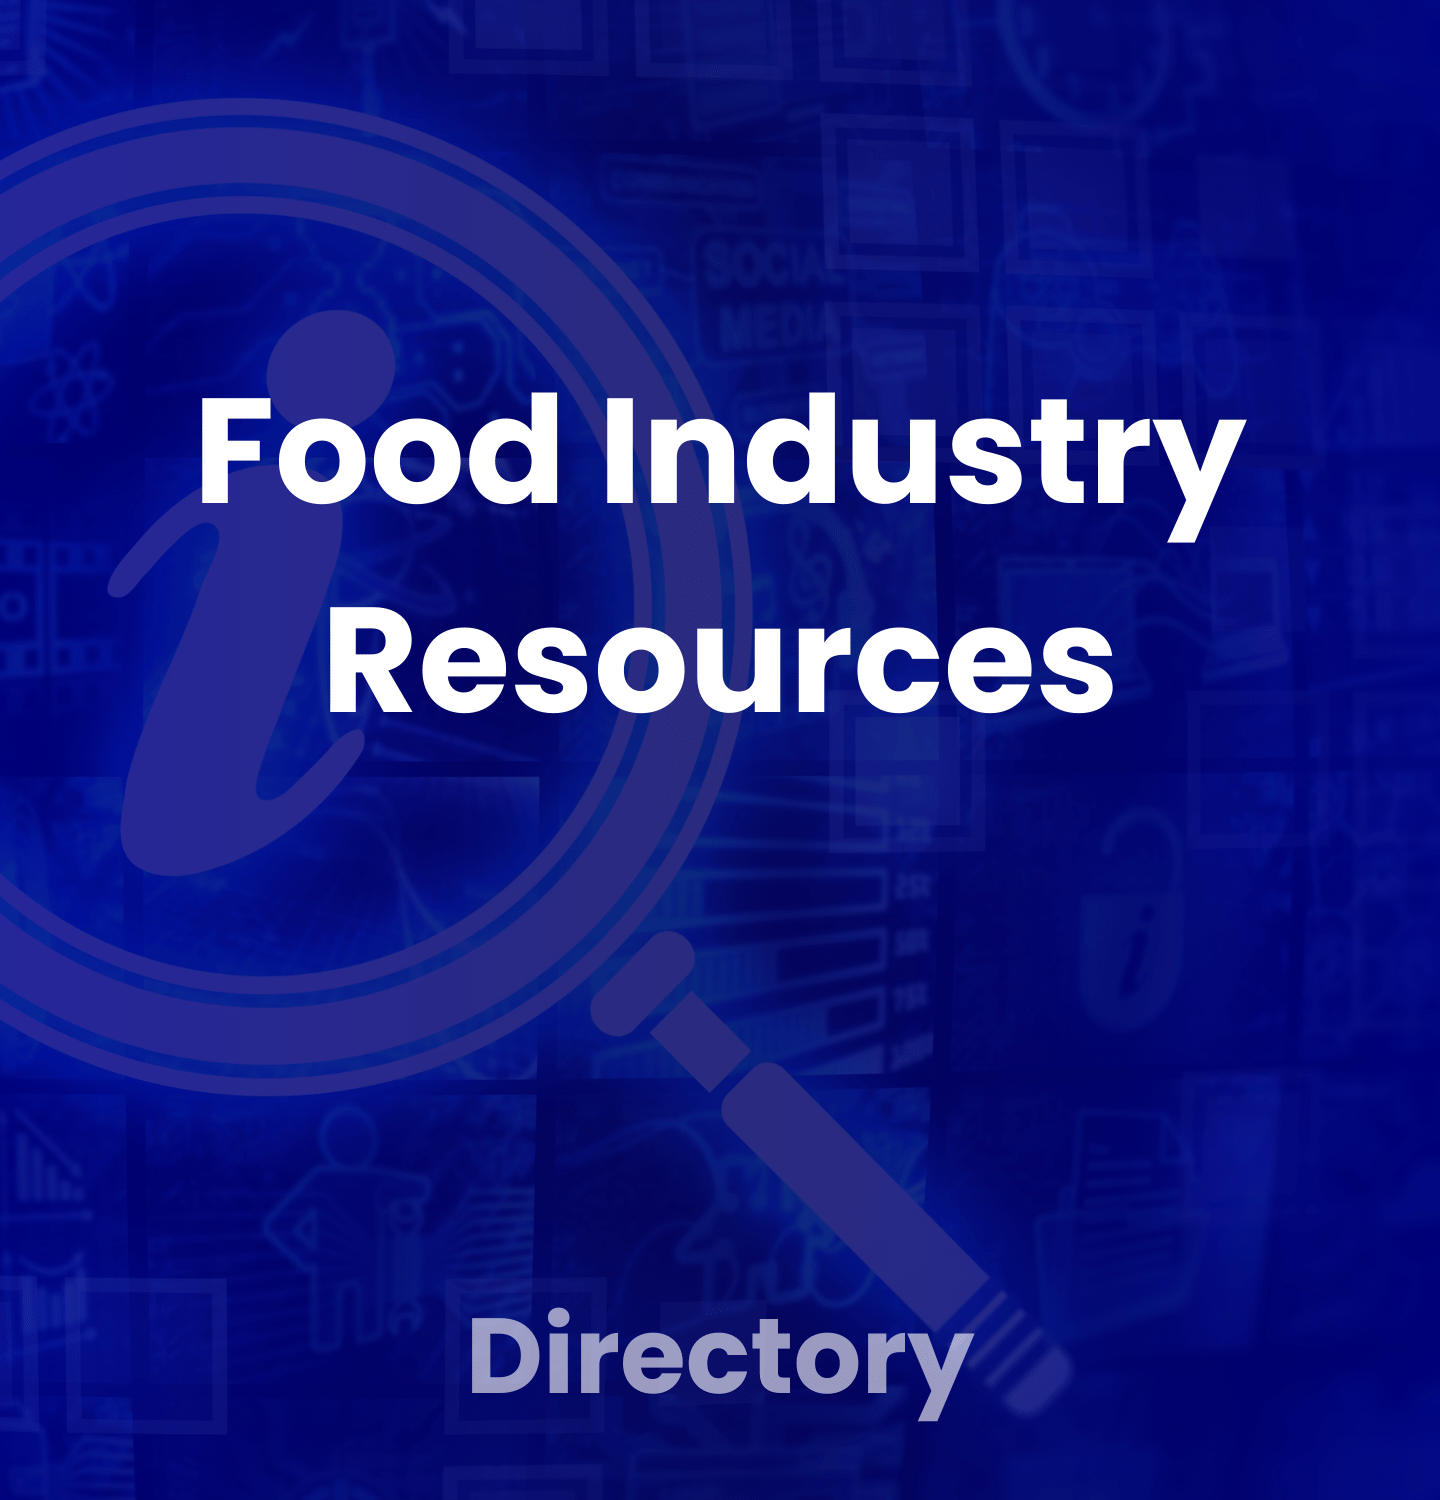 Food Industry Resources Directory